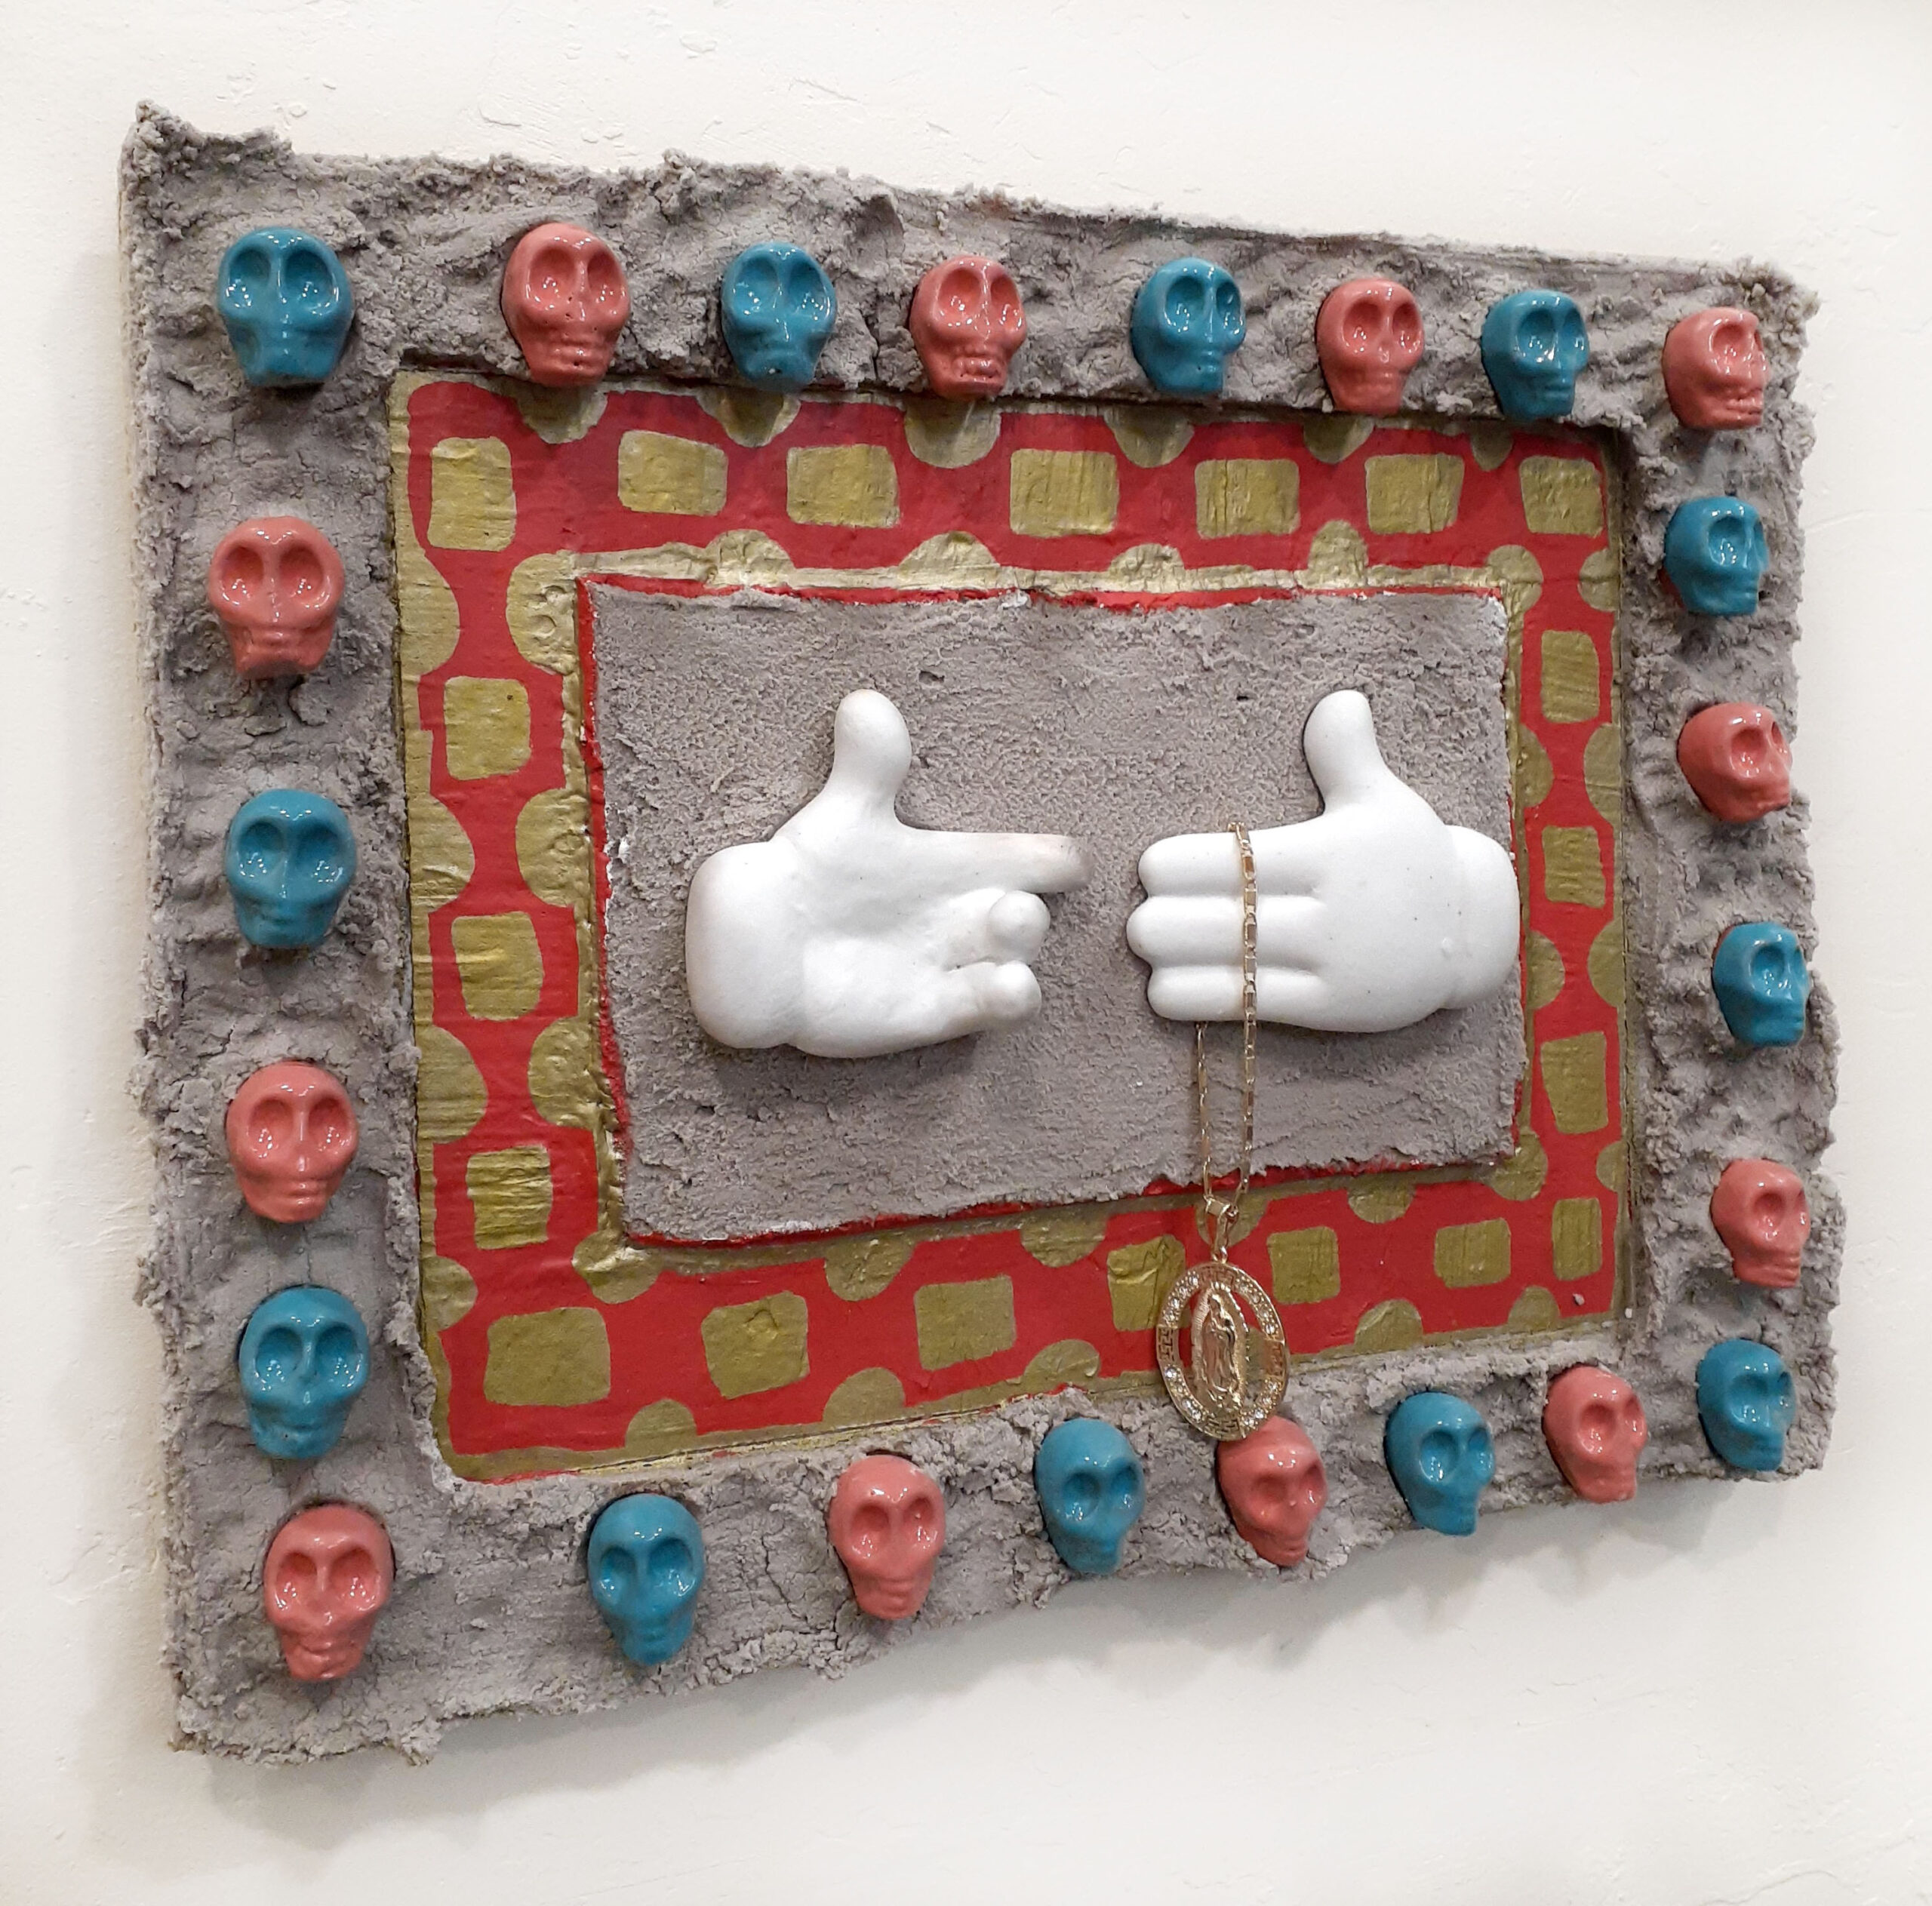 A cement and ceramics relief sculpture featuring the gloves of Mickey Mouse, Mexica skulls, and a gold Virgin Mary necklace.